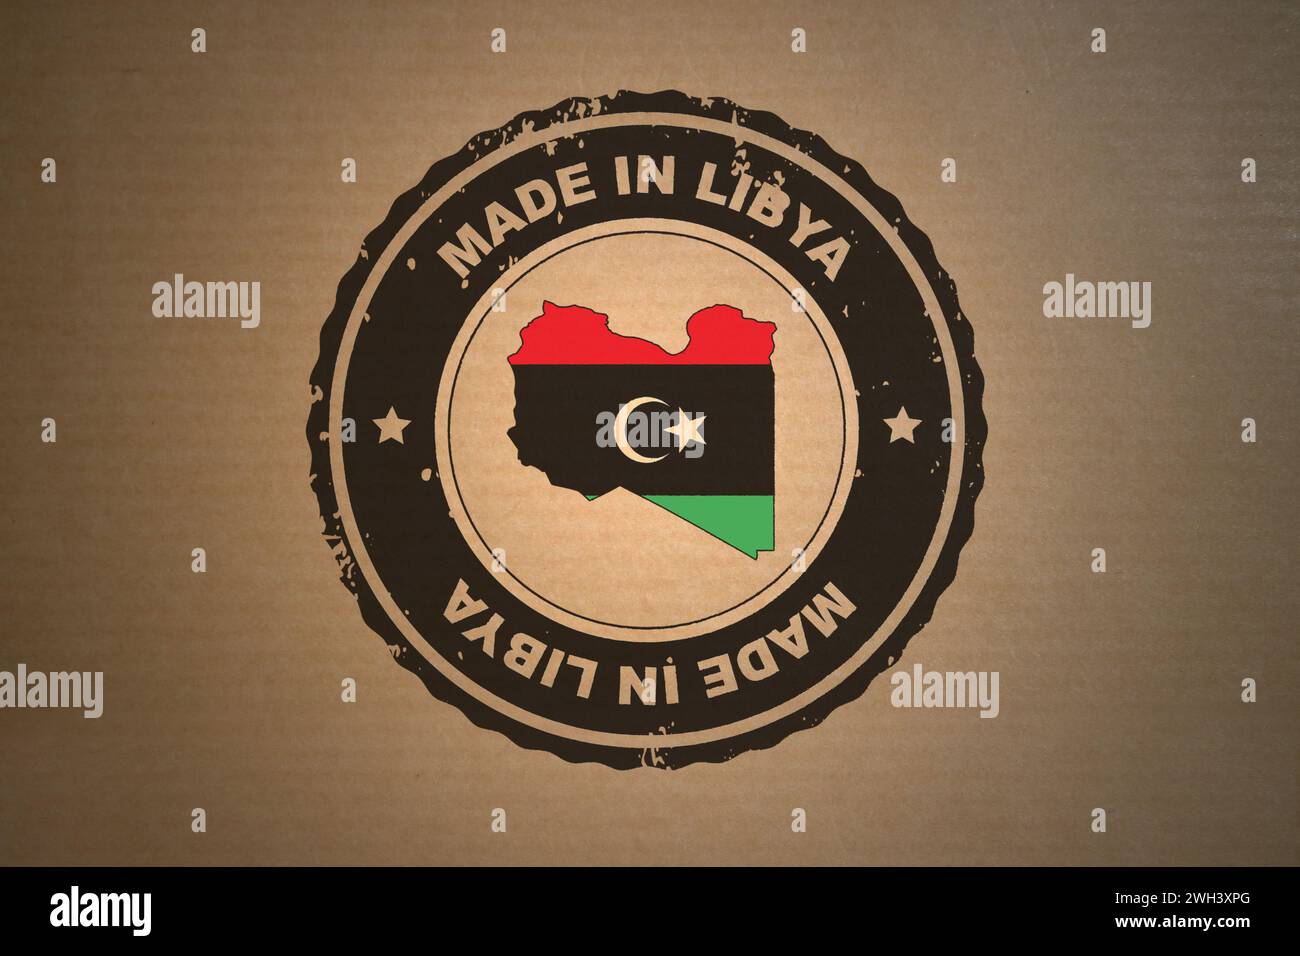 Brown paper with in its middle a retro style stamp Made in Libya include the map and flag of Libya. Stock Photo